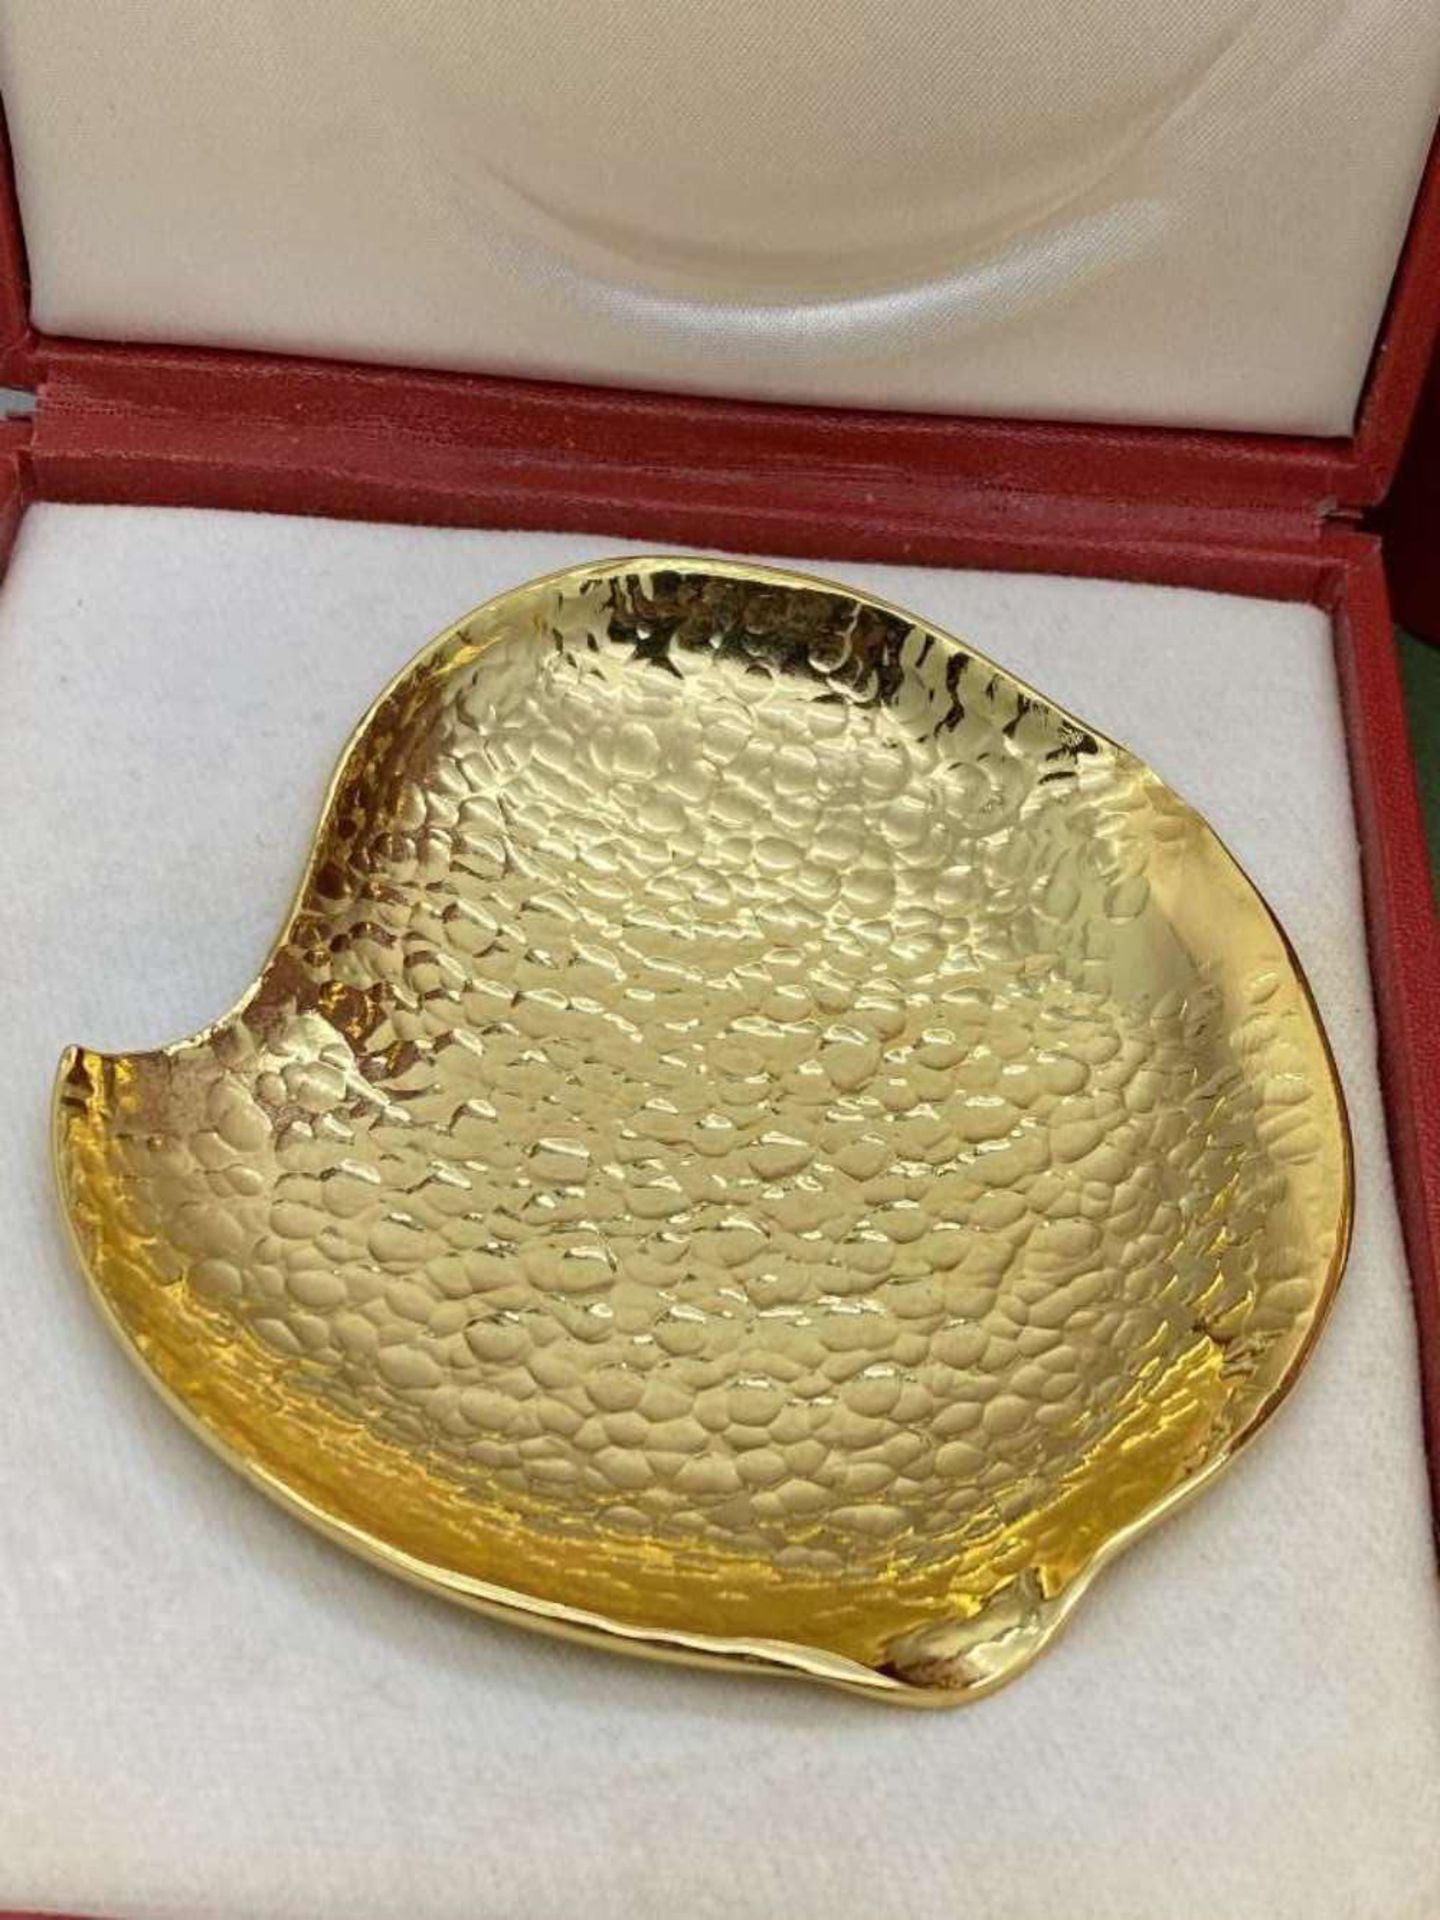 Cartier Paris - Gold Plated -Trinket Tray-Rare example. - Image 5 of 6